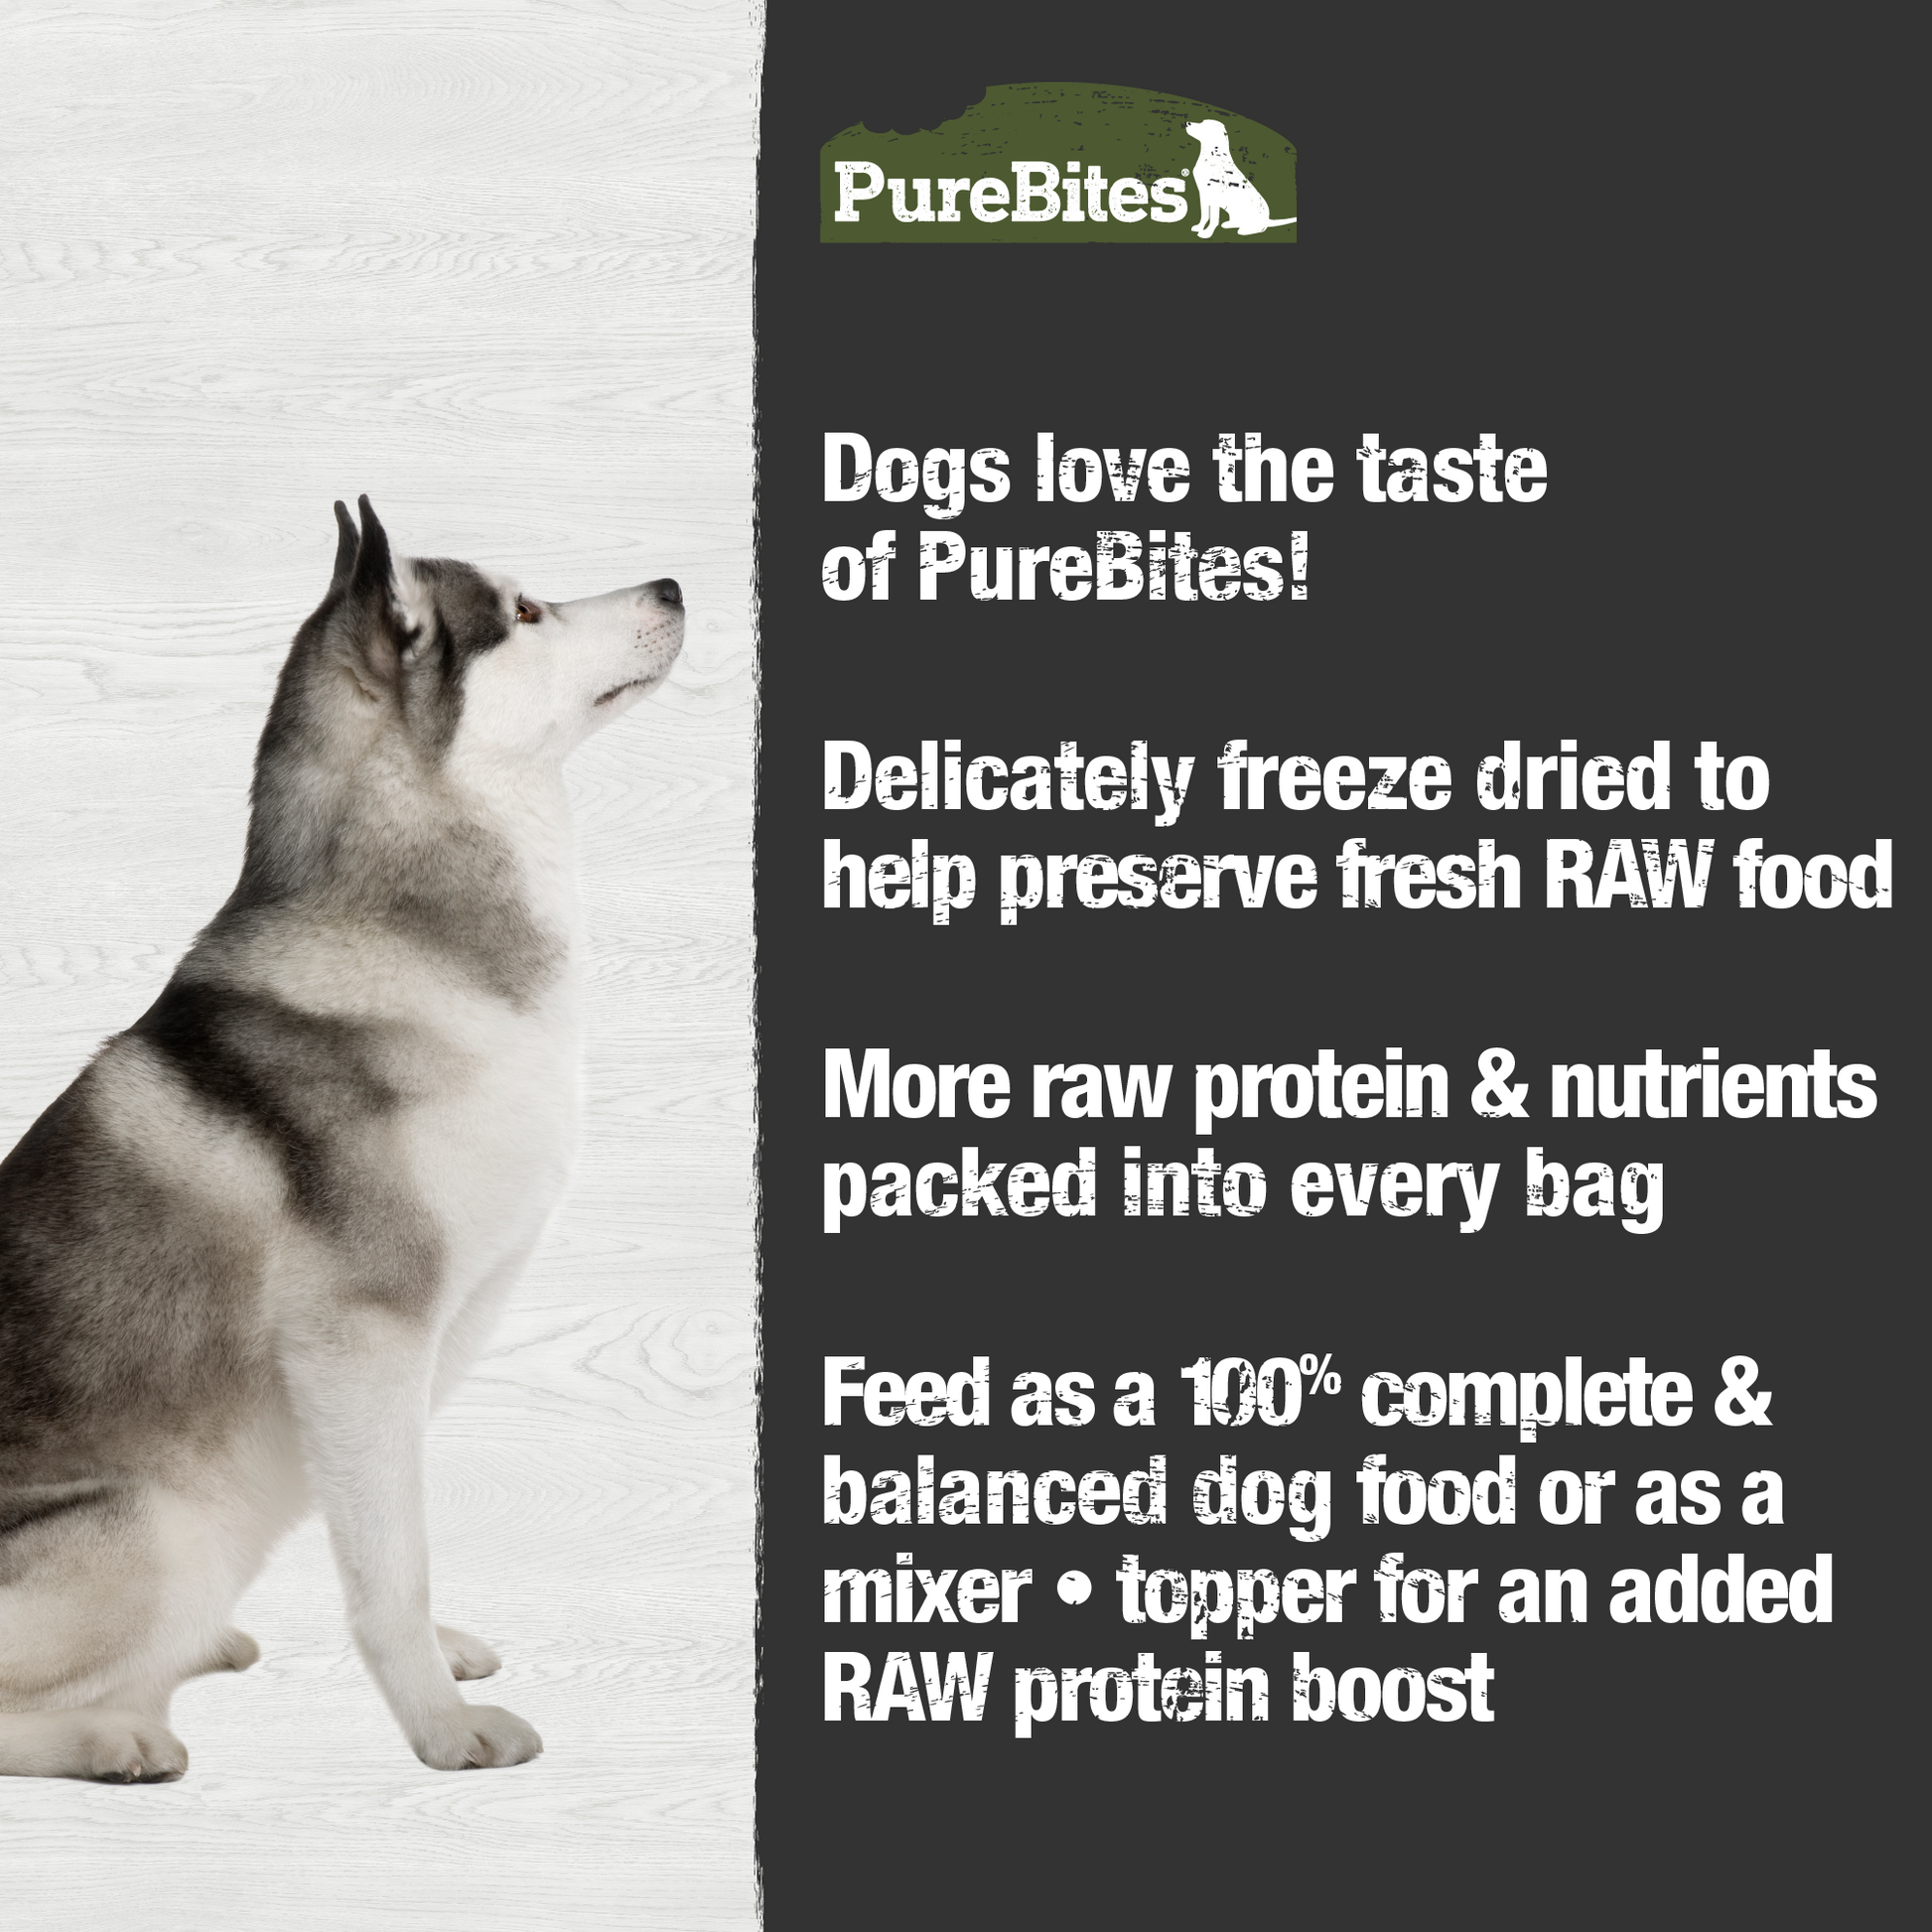 Made fresh & pure means more RAW protein and nutrients packed into every bag. Our beef recipe food or topper is freeze dried to help preserve the ingredient's RAW taste, and nutrition, and mirror a dog’s ancestral diet